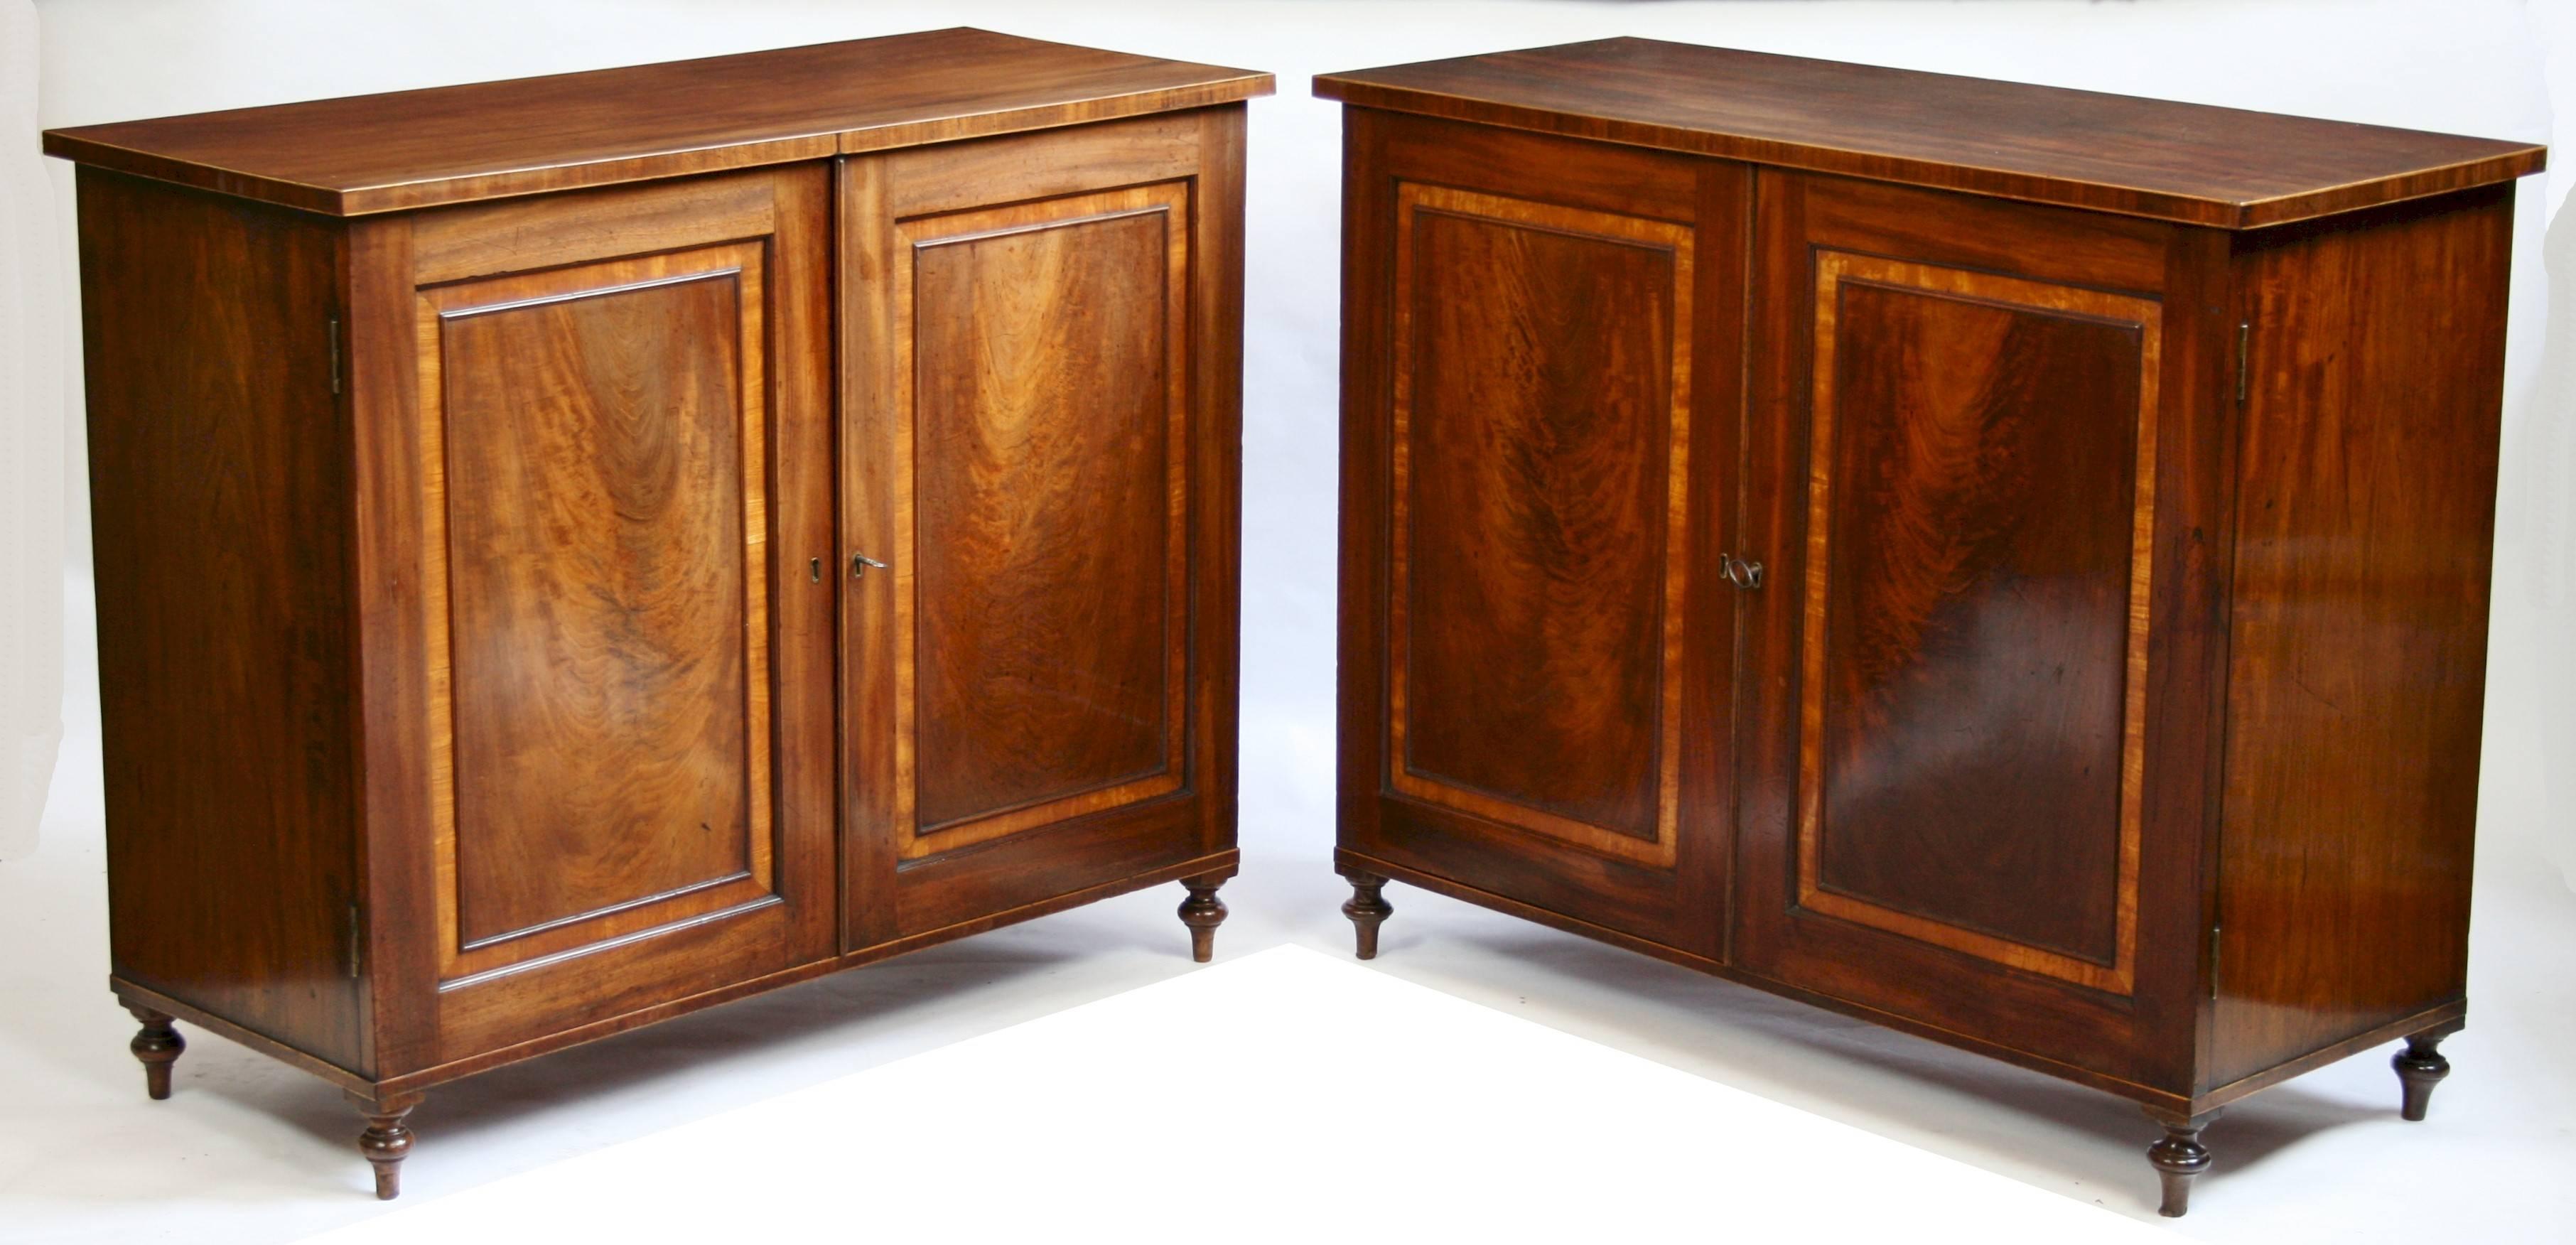 A fine pair of Georgian cabinets by Gillows of Lancaster; the cabinet doors veneered with well figured Cuban flame mahogany and crossbanded in satinwood opening to reveal drawers with fire gilded brass swan neck handles; raised on turned